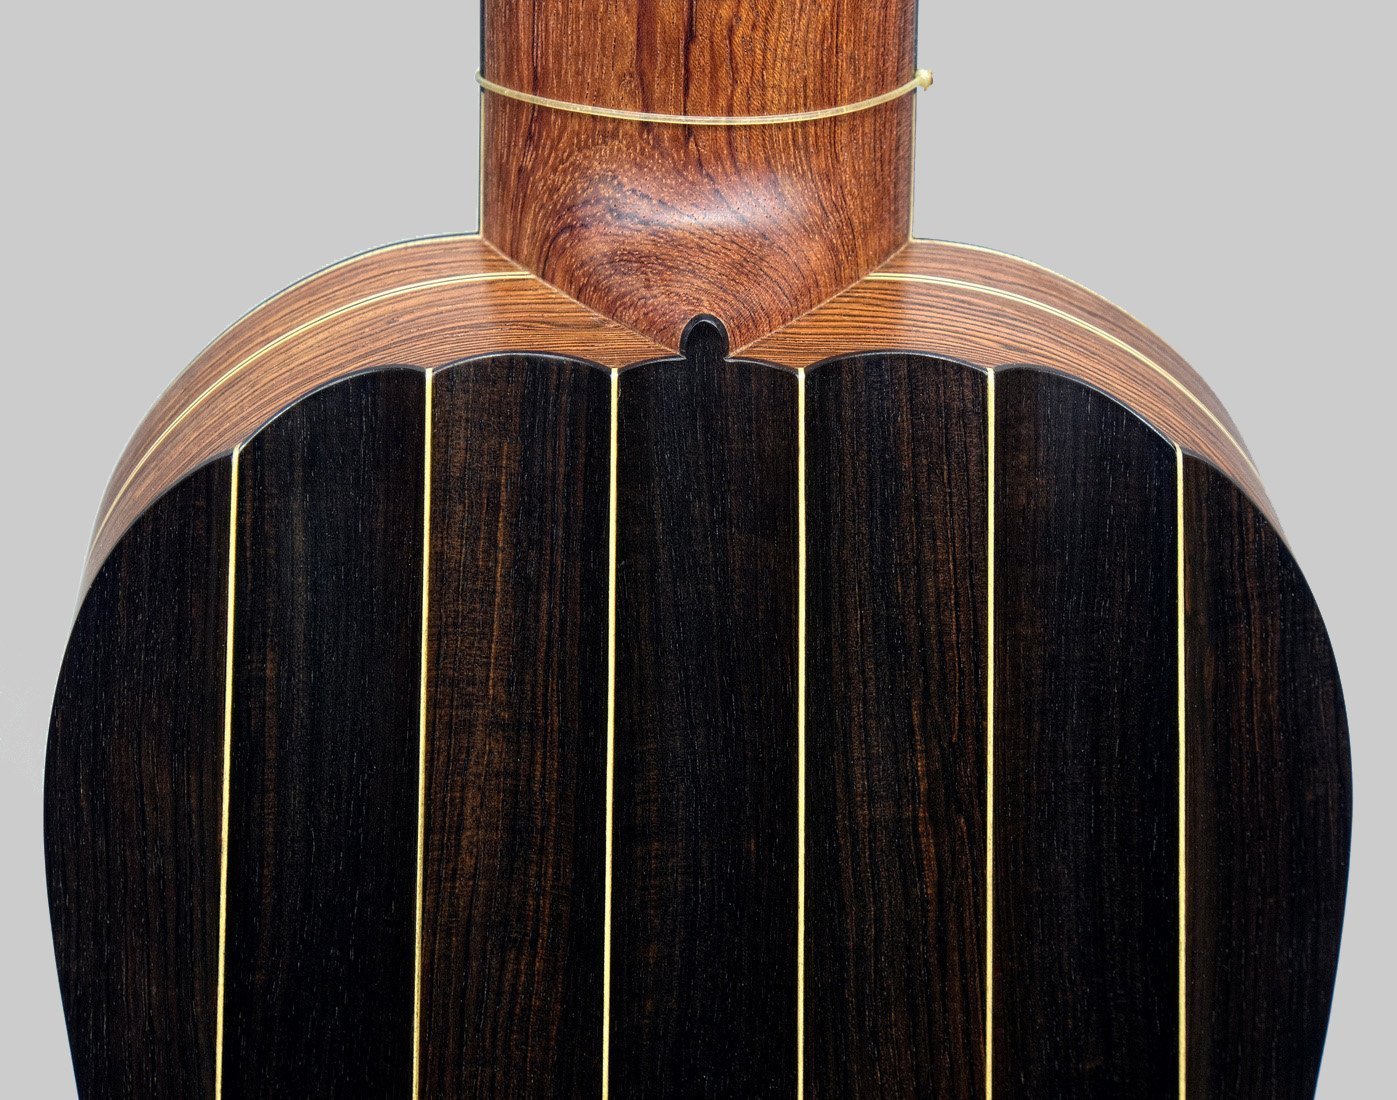 Fluted ribs in african blackwood at neck join